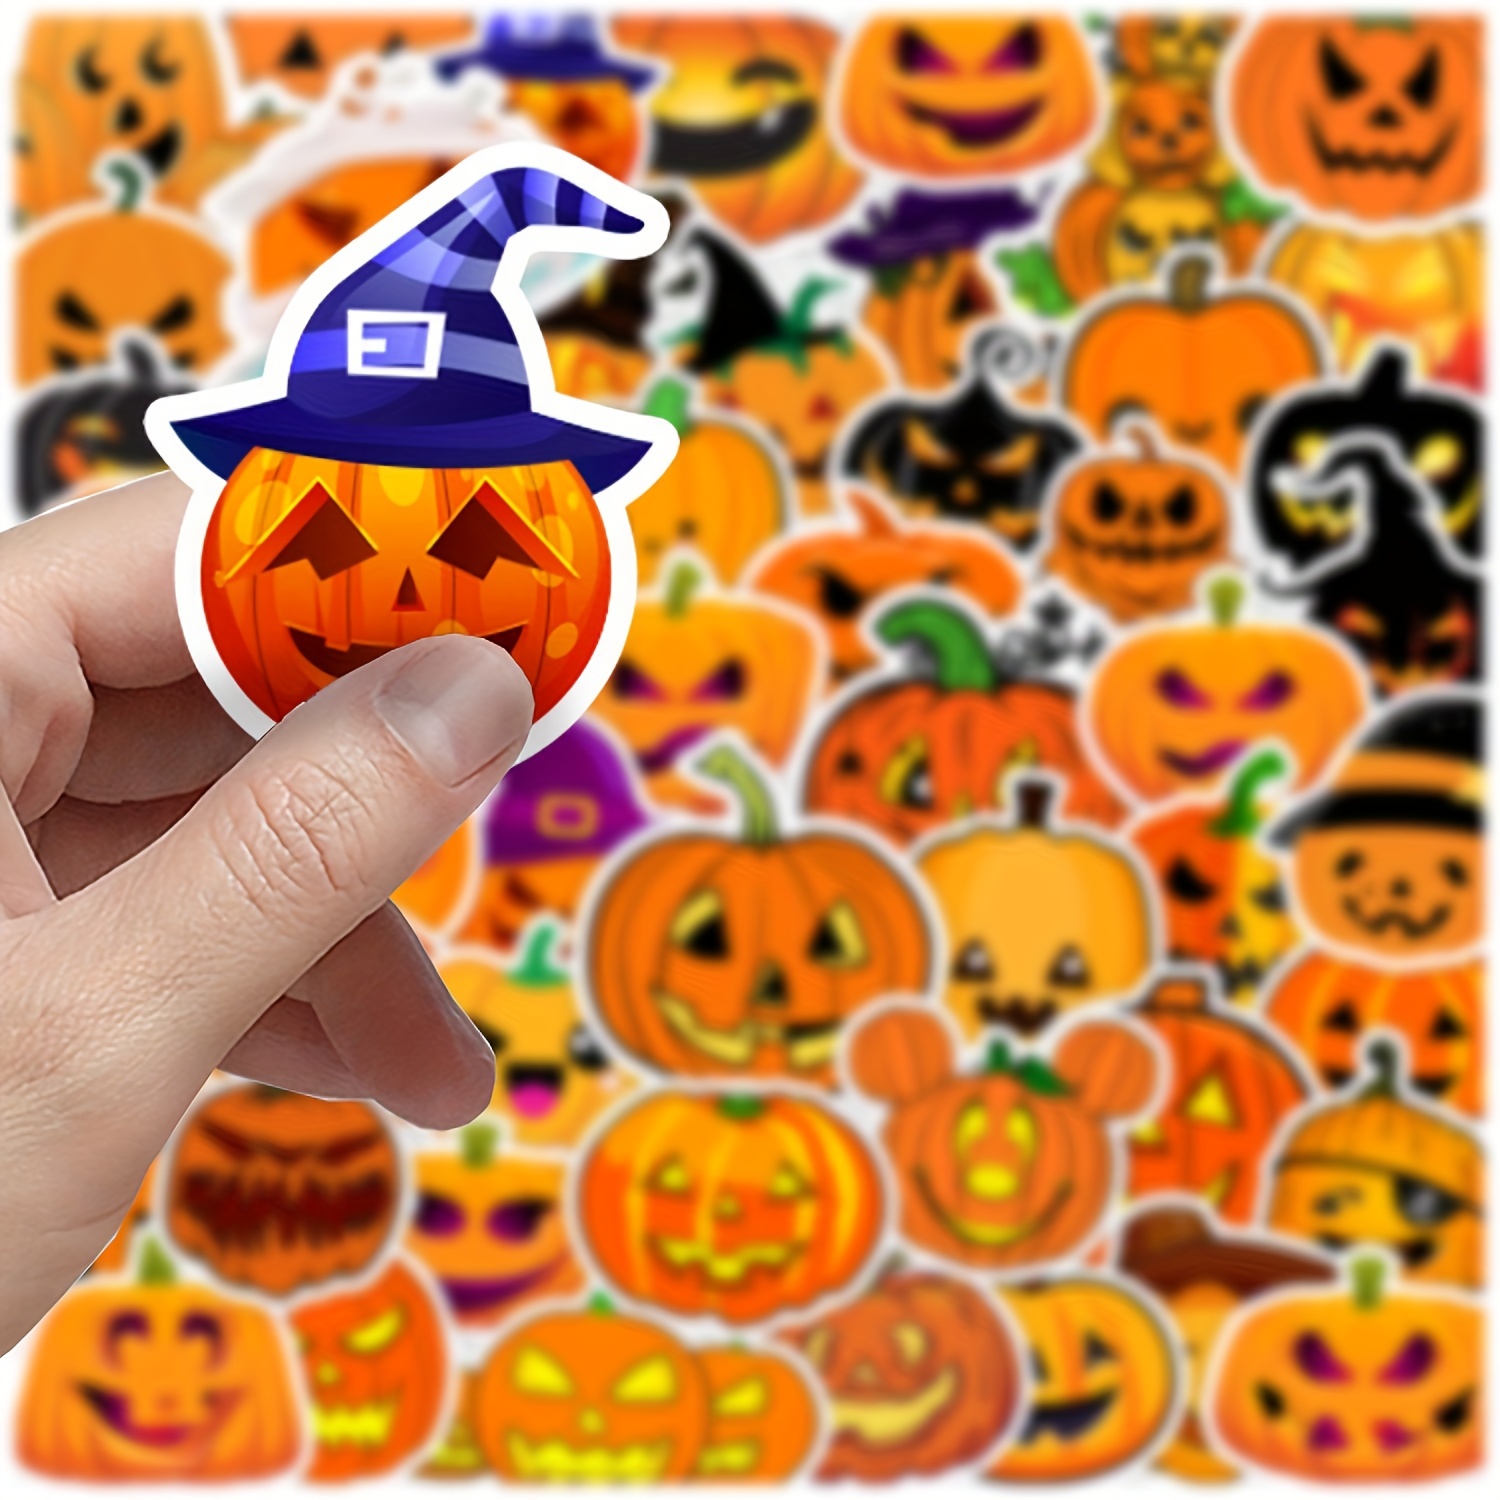 China Factory 100Pcs Halloween Stickers for Kids Teens Adults, Pumpkin  Stickers Decals for Laptop Skateboard, Funny Party Stickers 40~60mm in bulk  online 